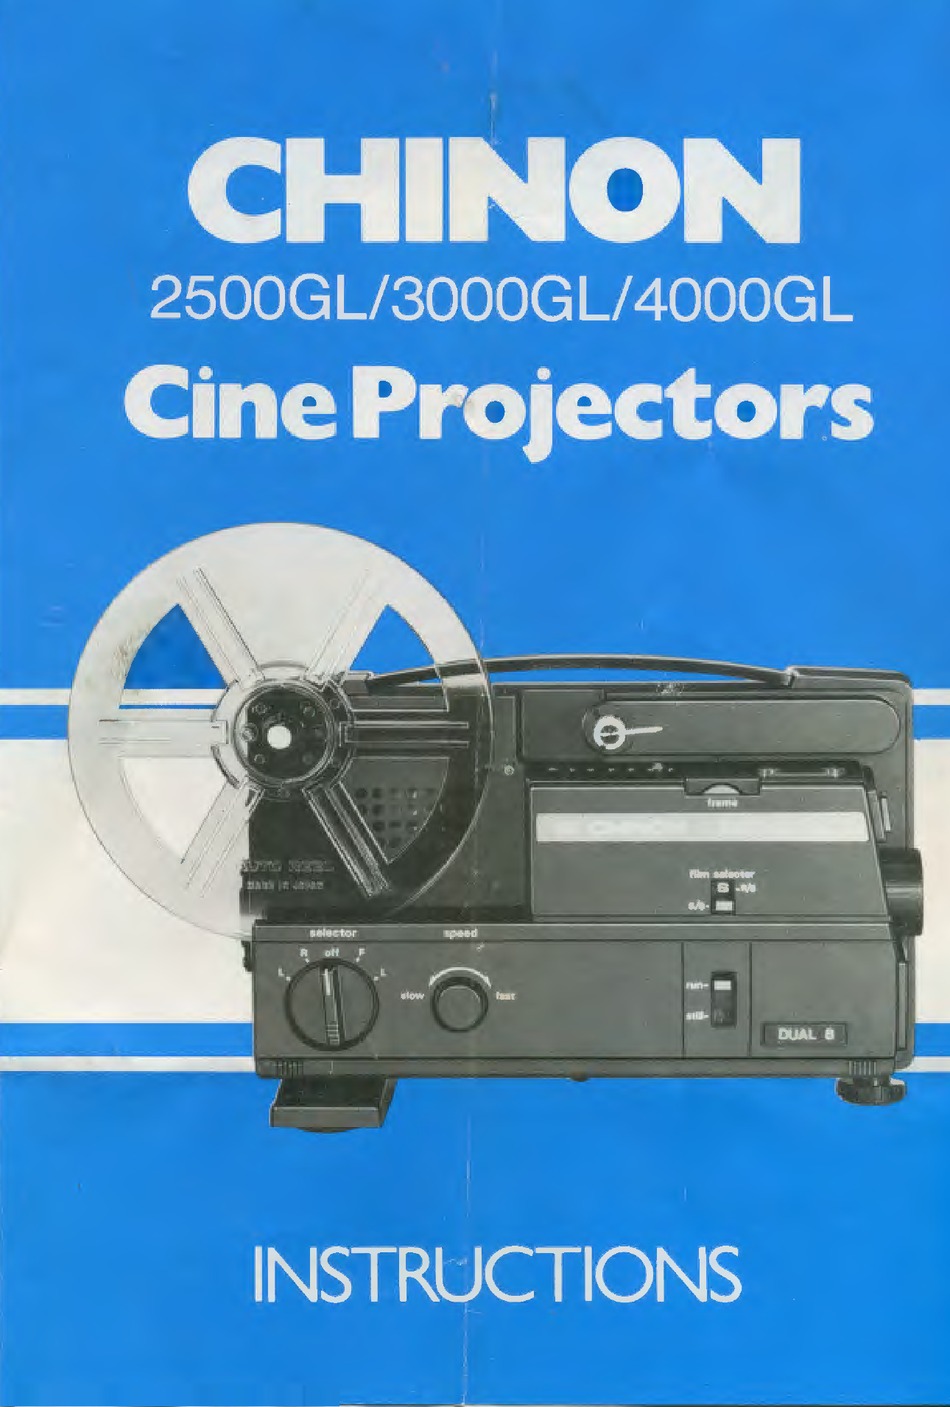 Threading Film; Projection - CHINON 2500GL Instructions Manual